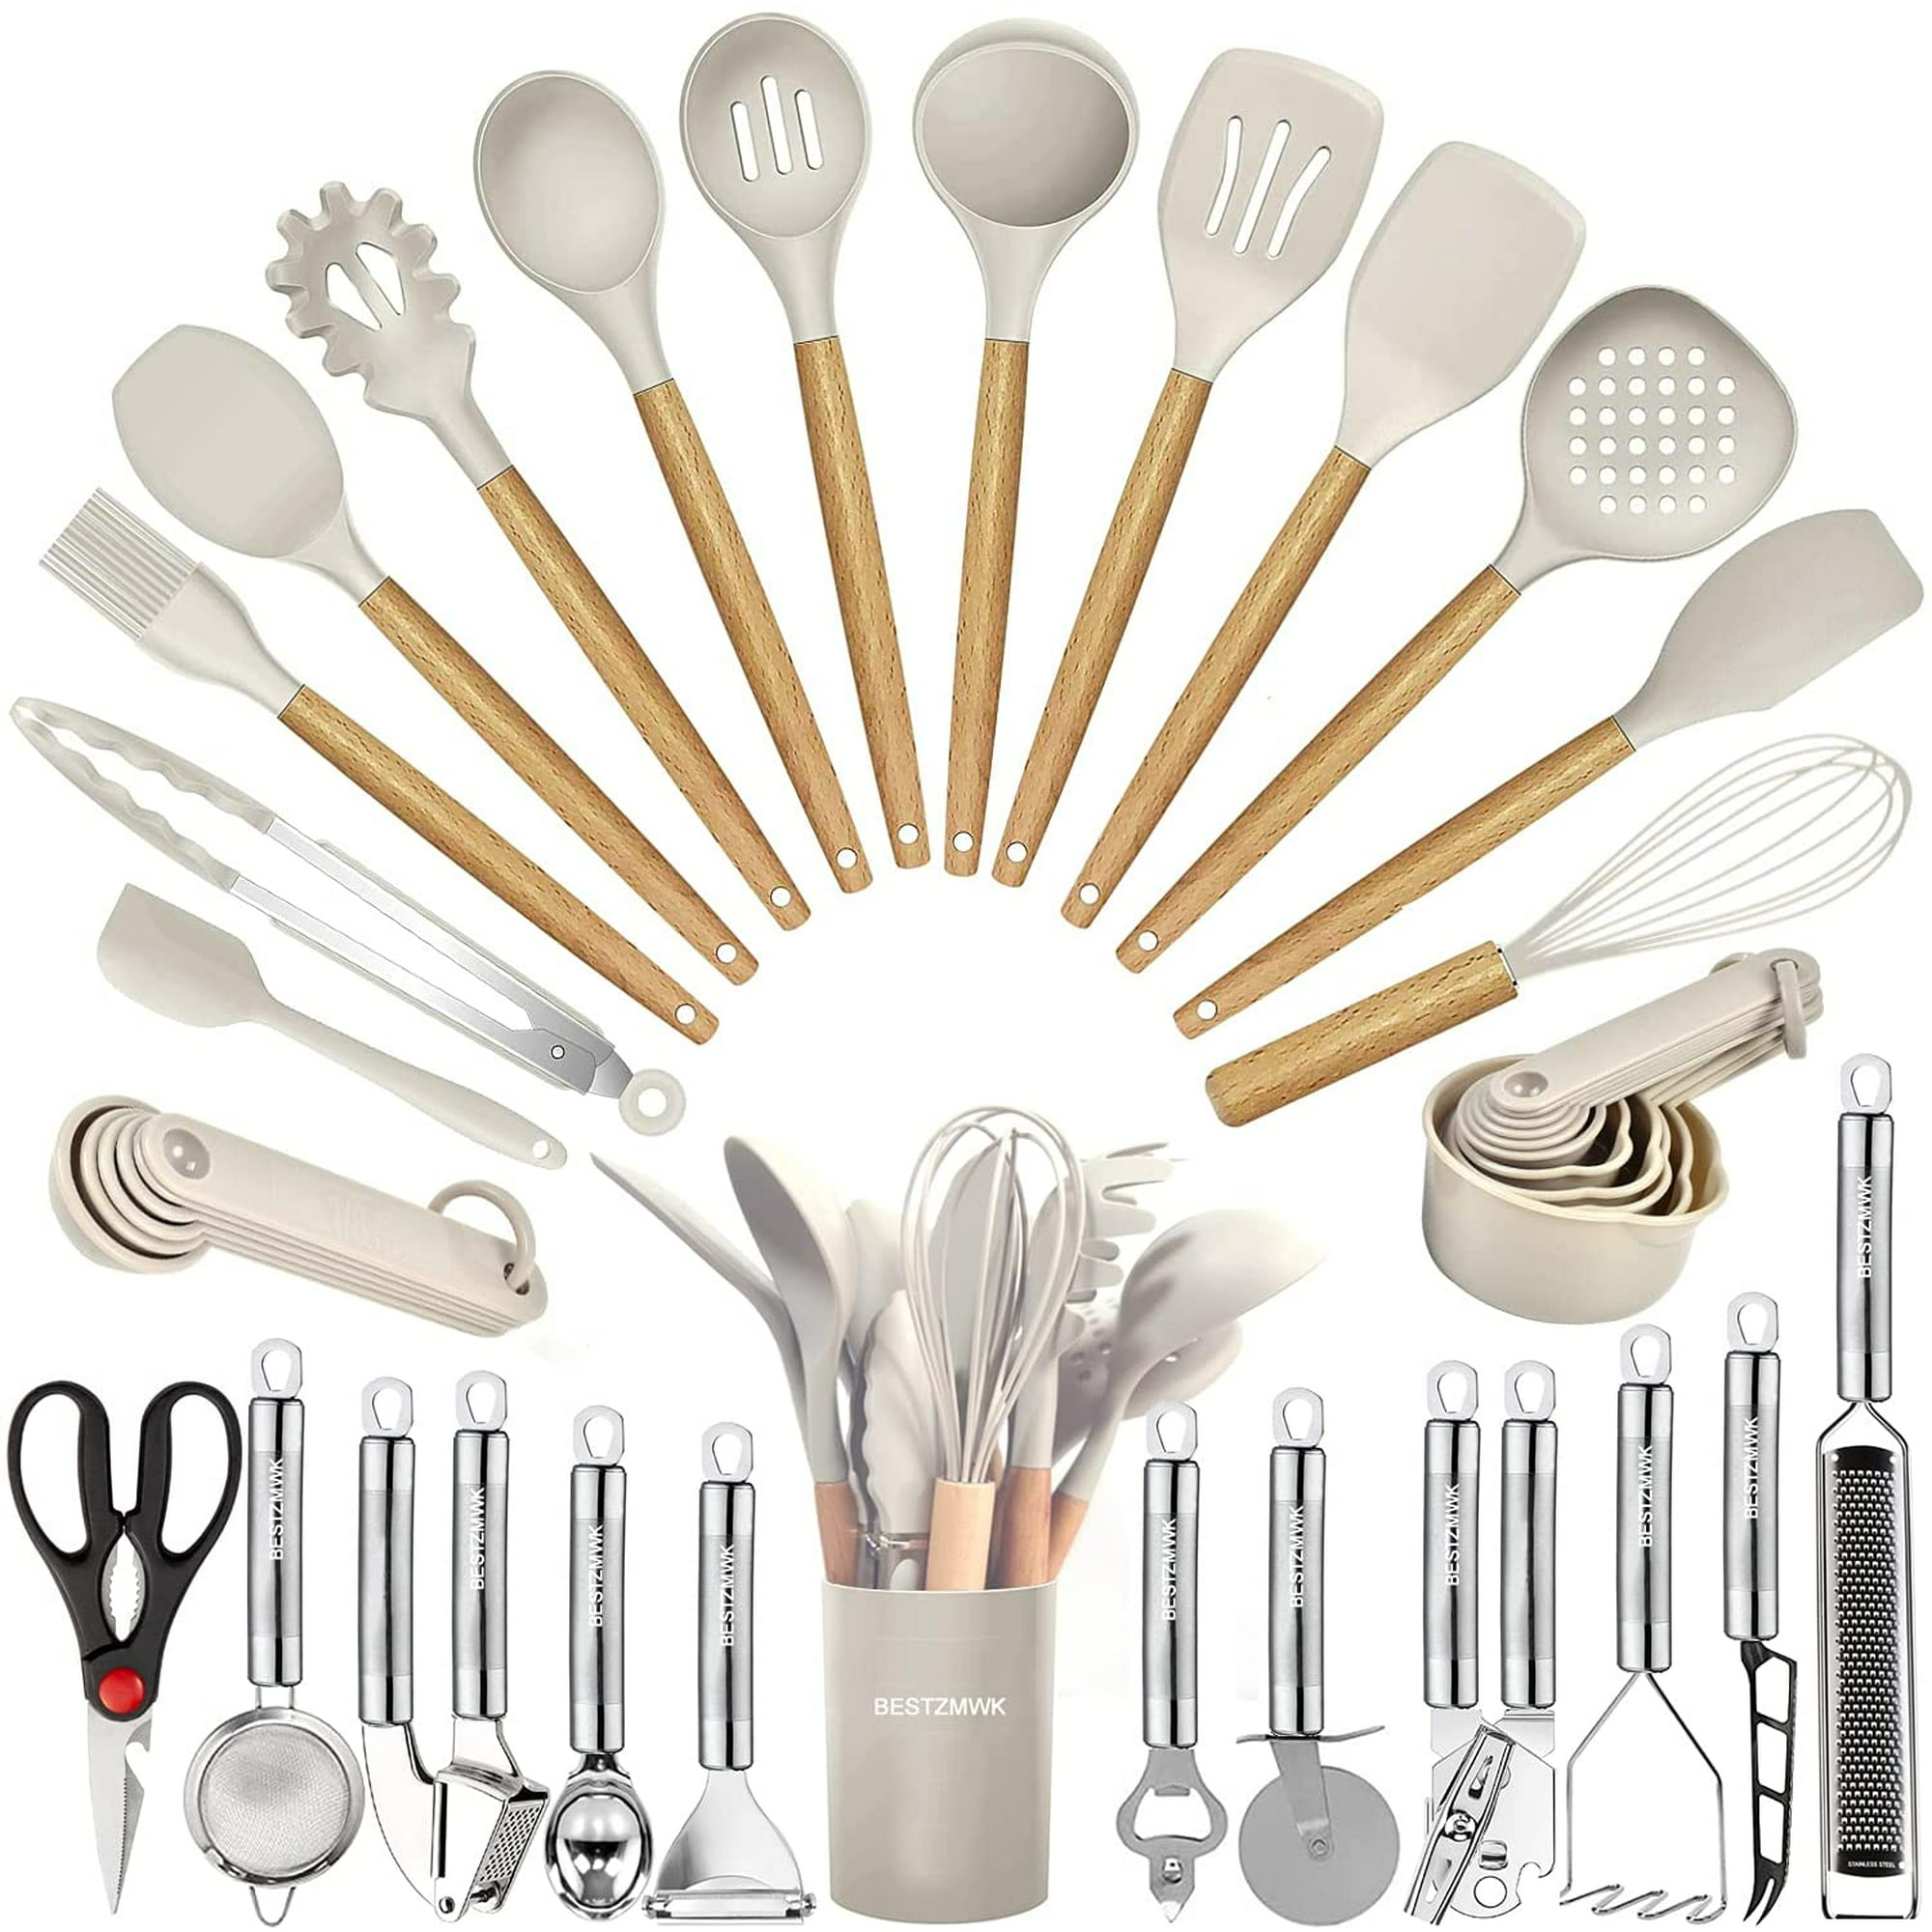 HTAIGUO Utensils Set- 35 PCs Cooking Utensils with Grater,Tongs, Spoon  Spatula &Turner Made of Heat Resistant Food Grade Silicone and Wooden  Handles